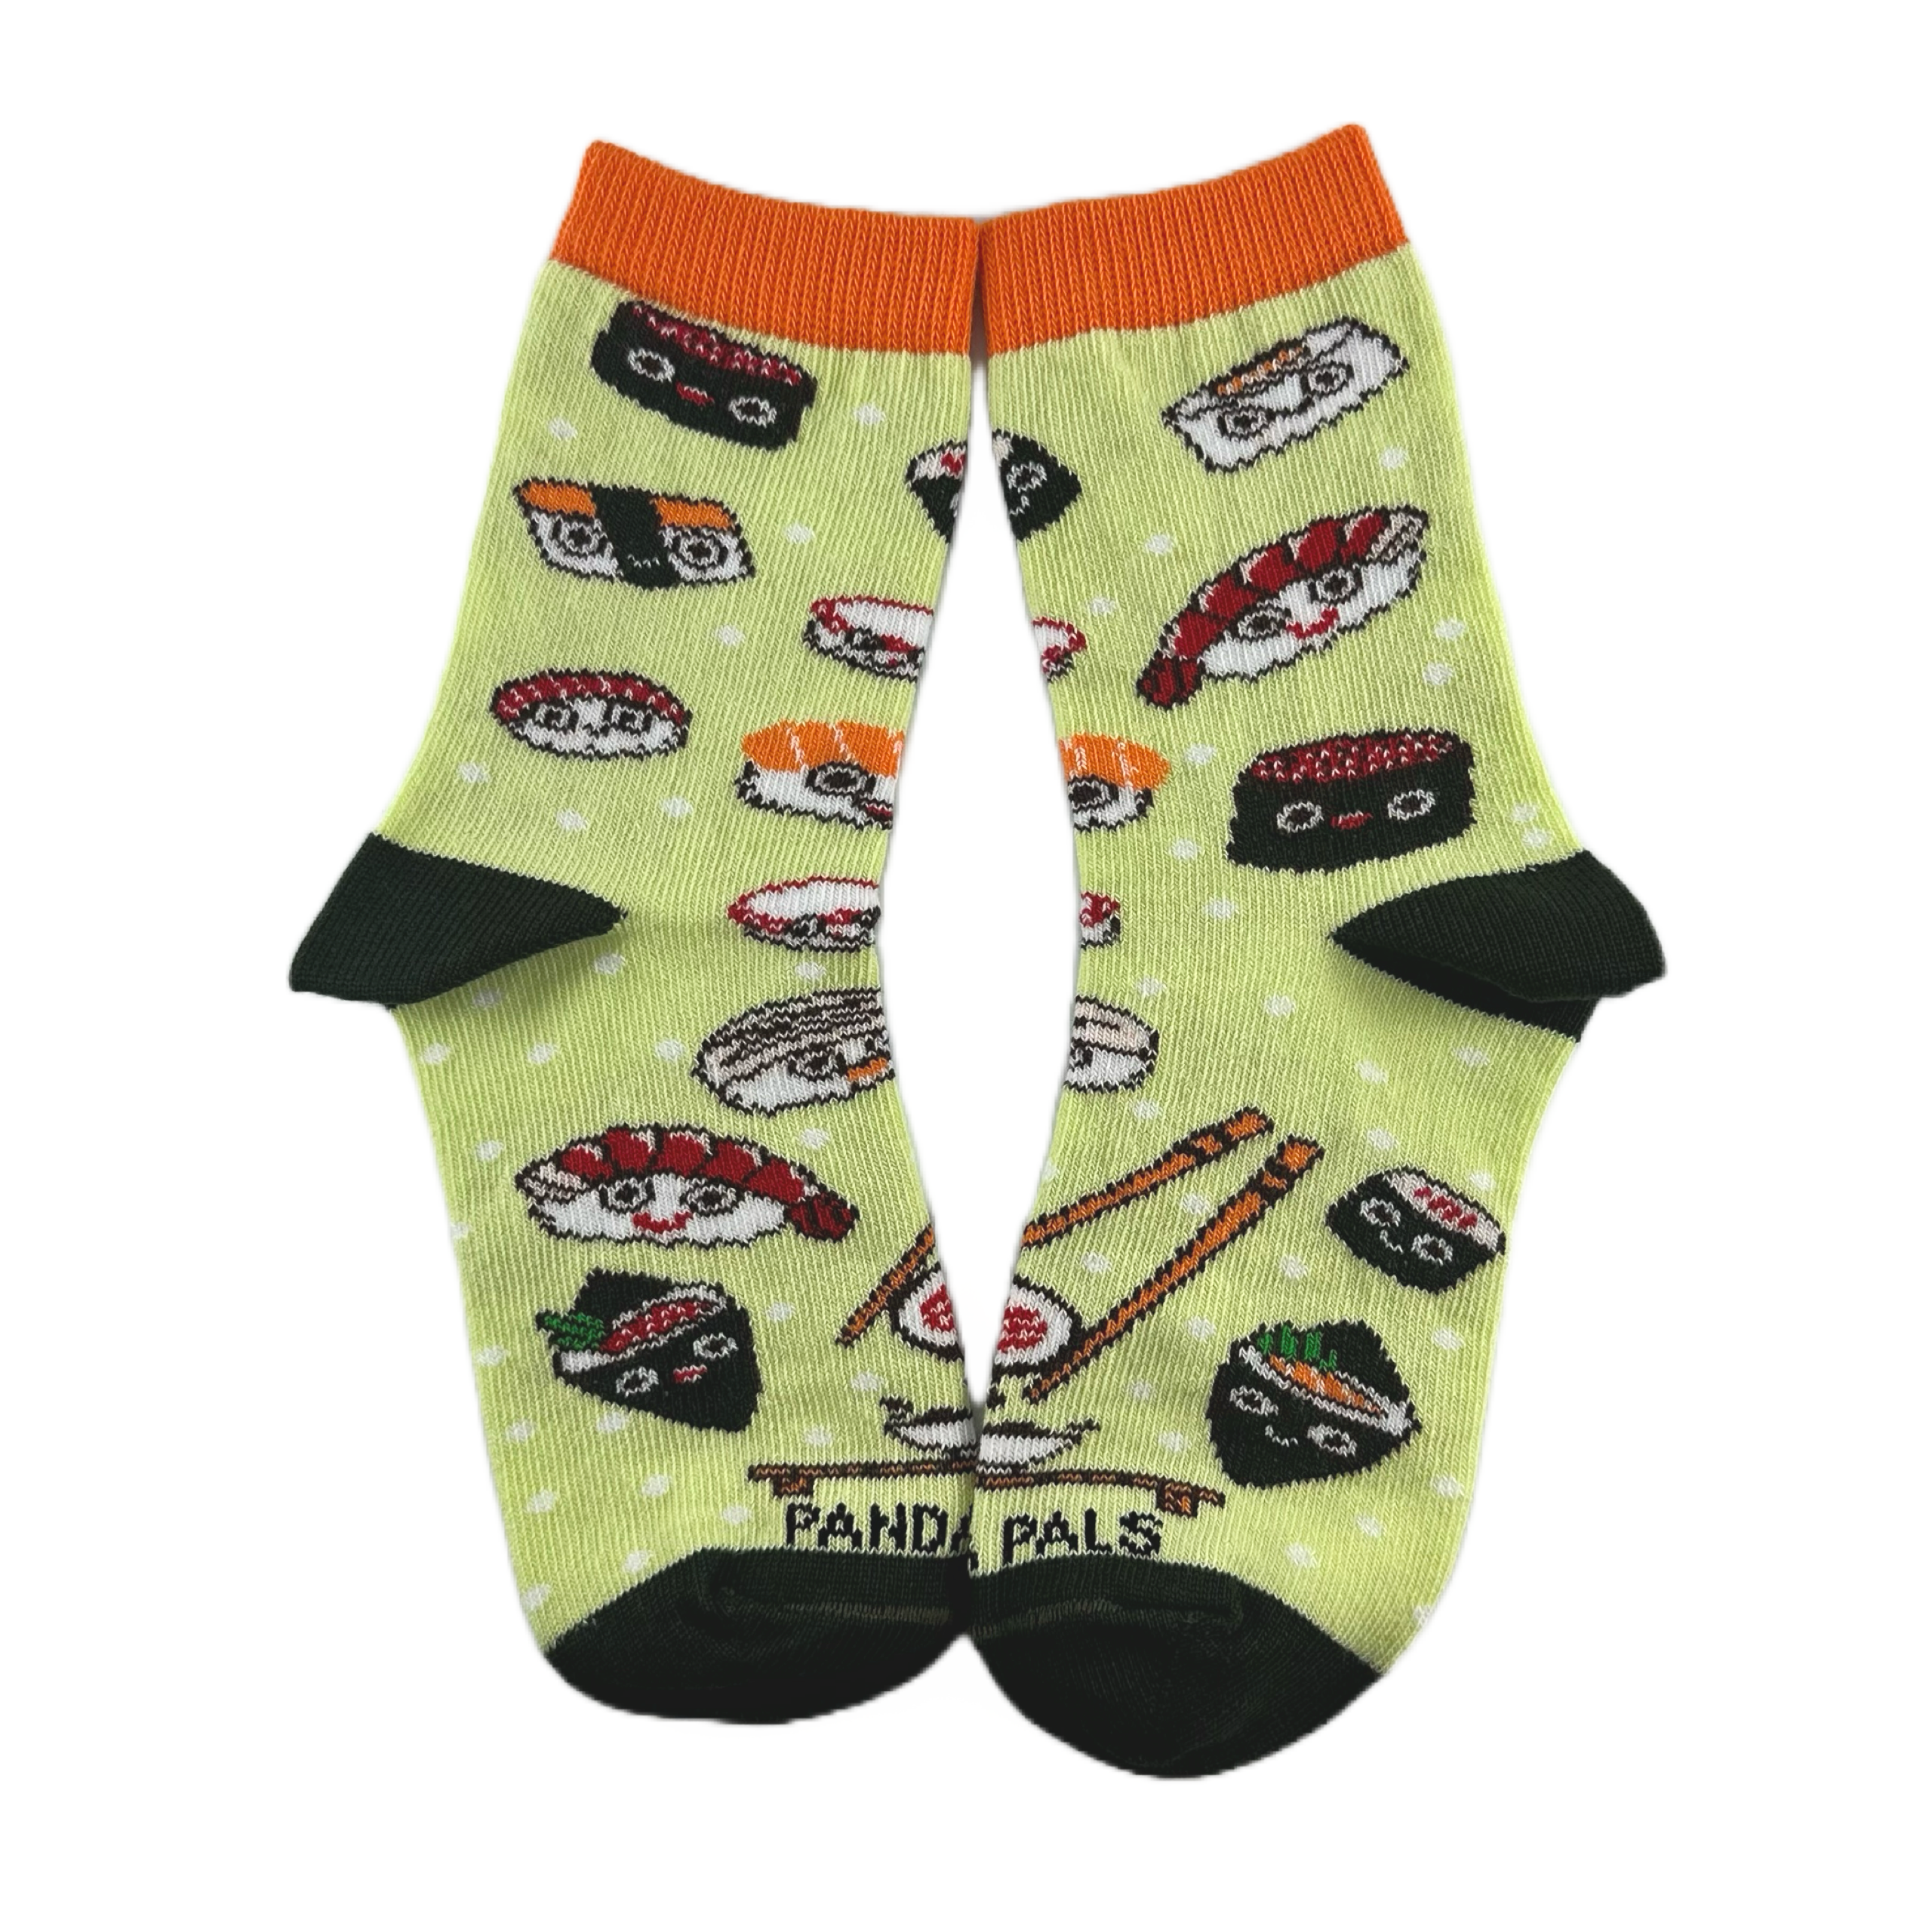 Sushi Socks from the Sock Panda (Ages 3-7)